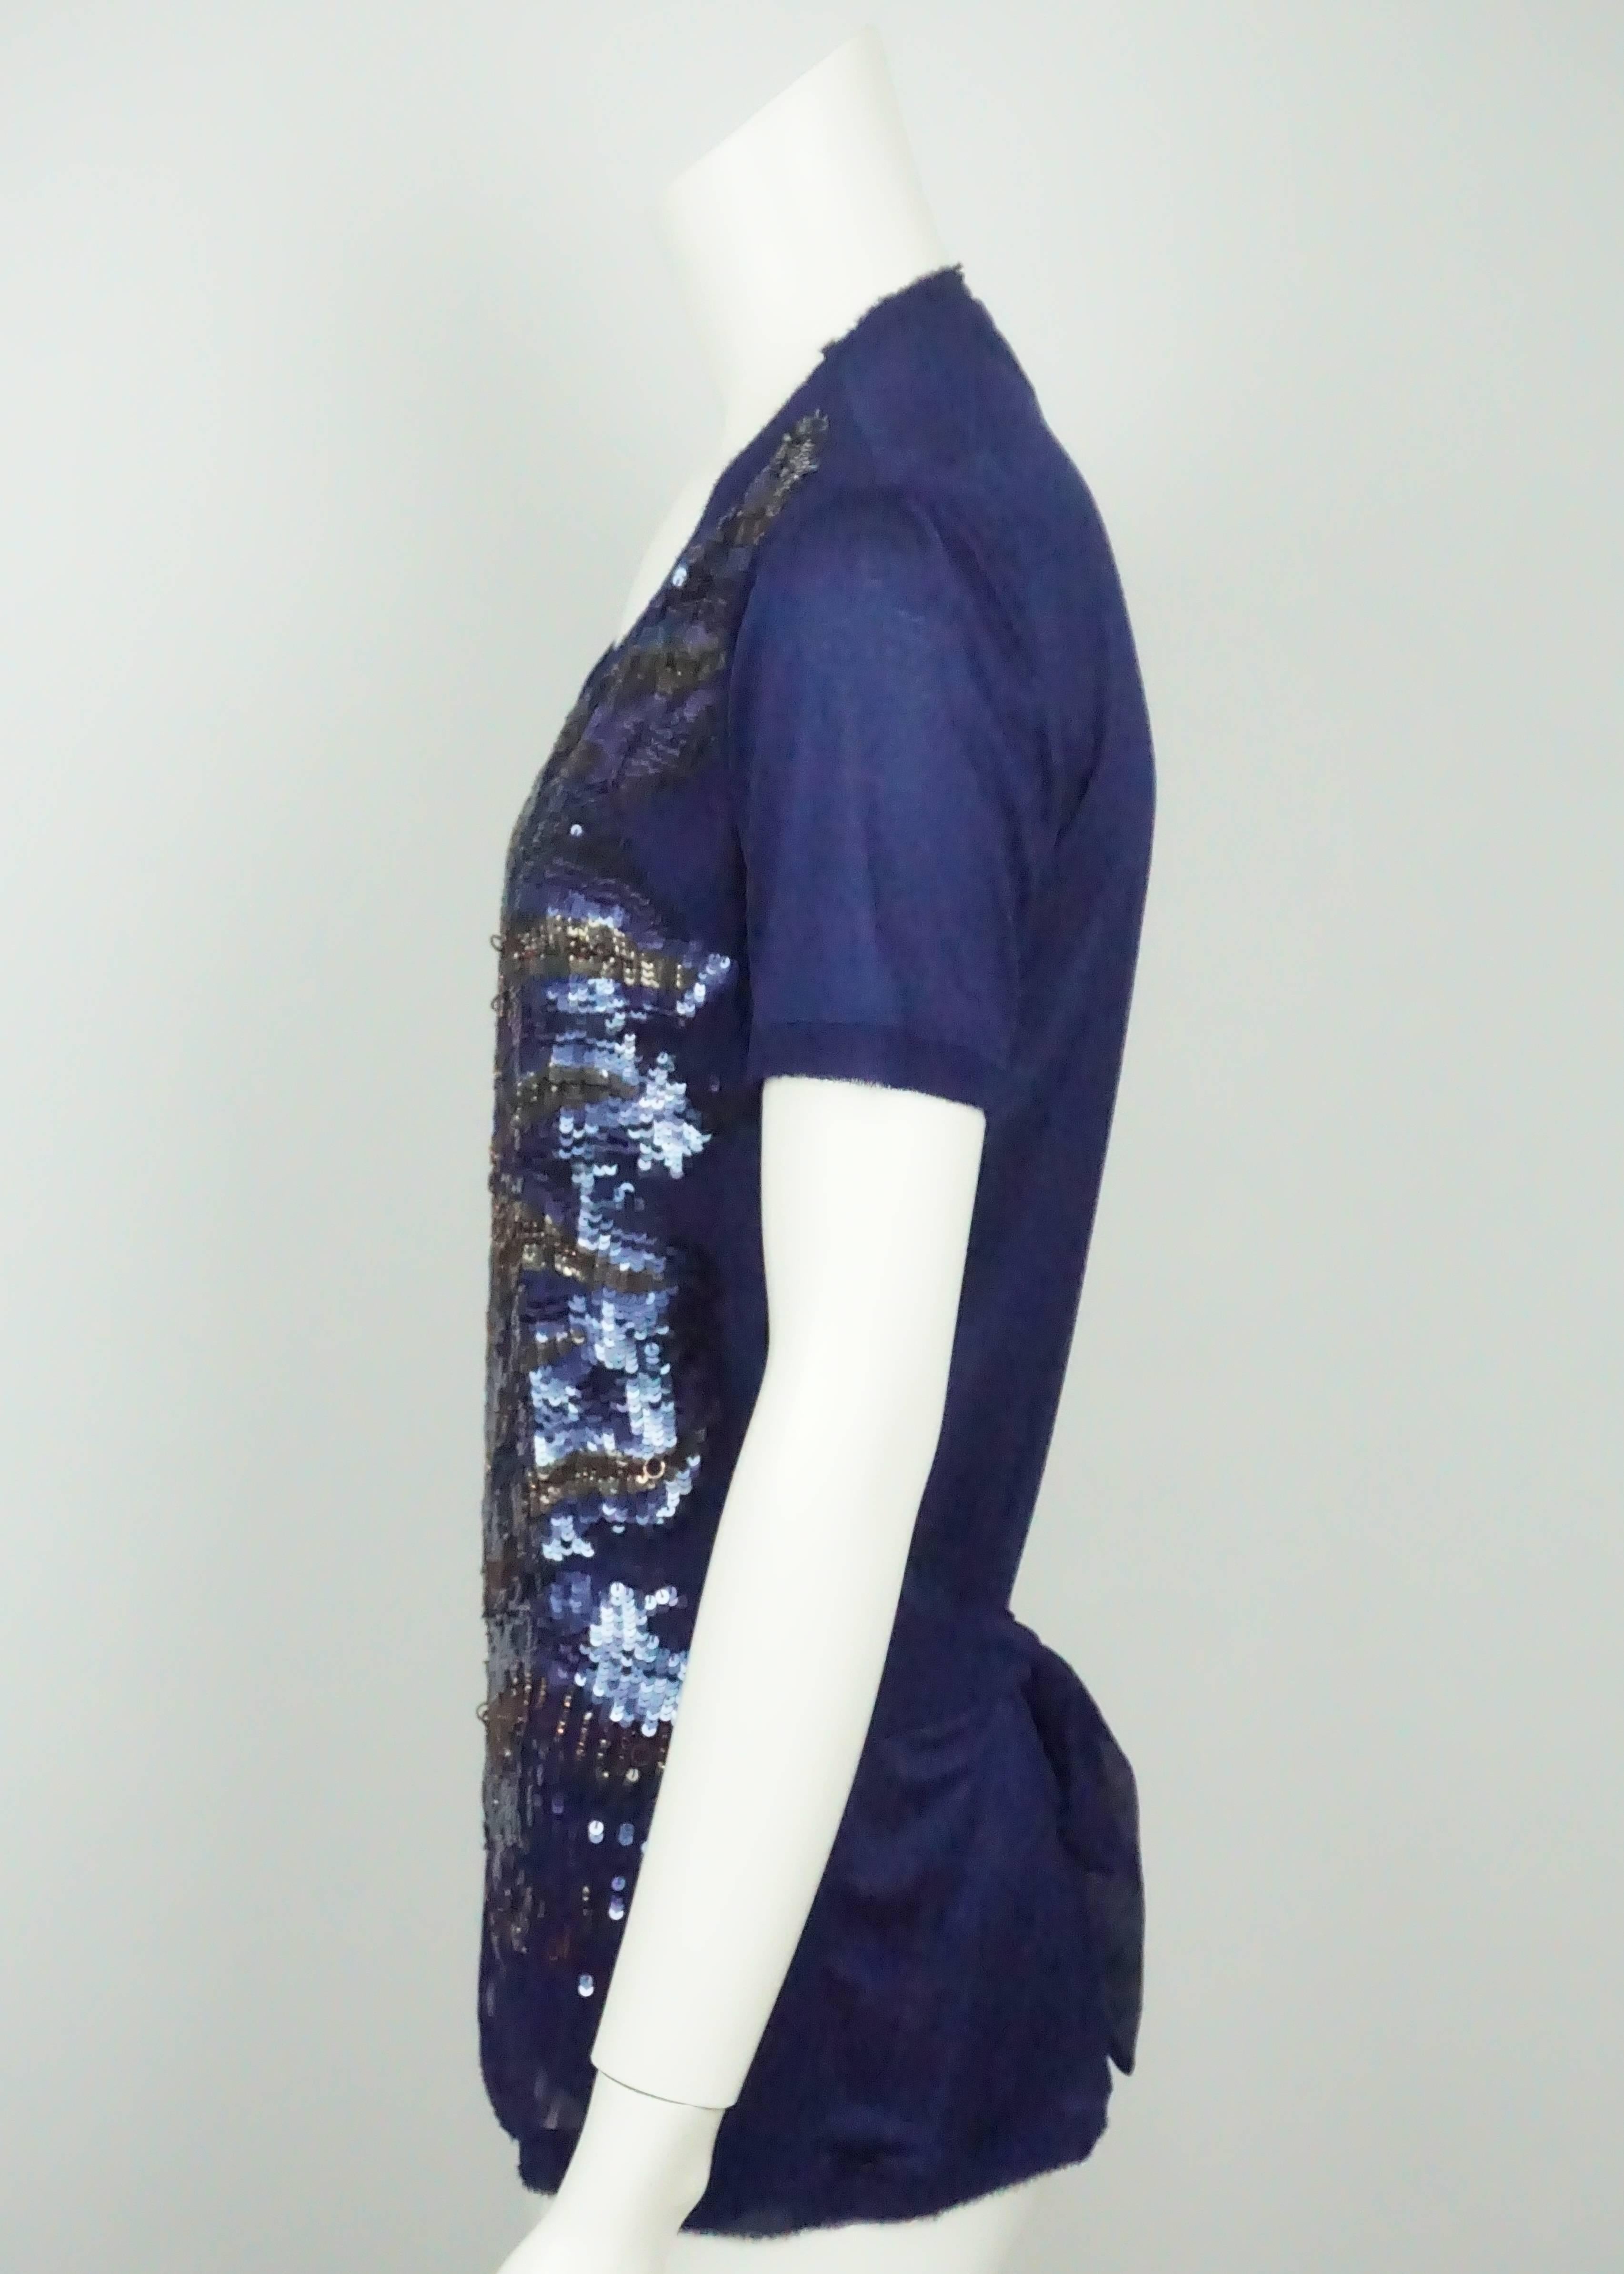 Roberto Cavalli Blue Silk S/S w/ Sequin - 6  This stunning Cavalli poly-blend top is in excellent condition. The front and the back fabrics of the top are completely different. The front has a double layer of chiffon and the back is a stretchable